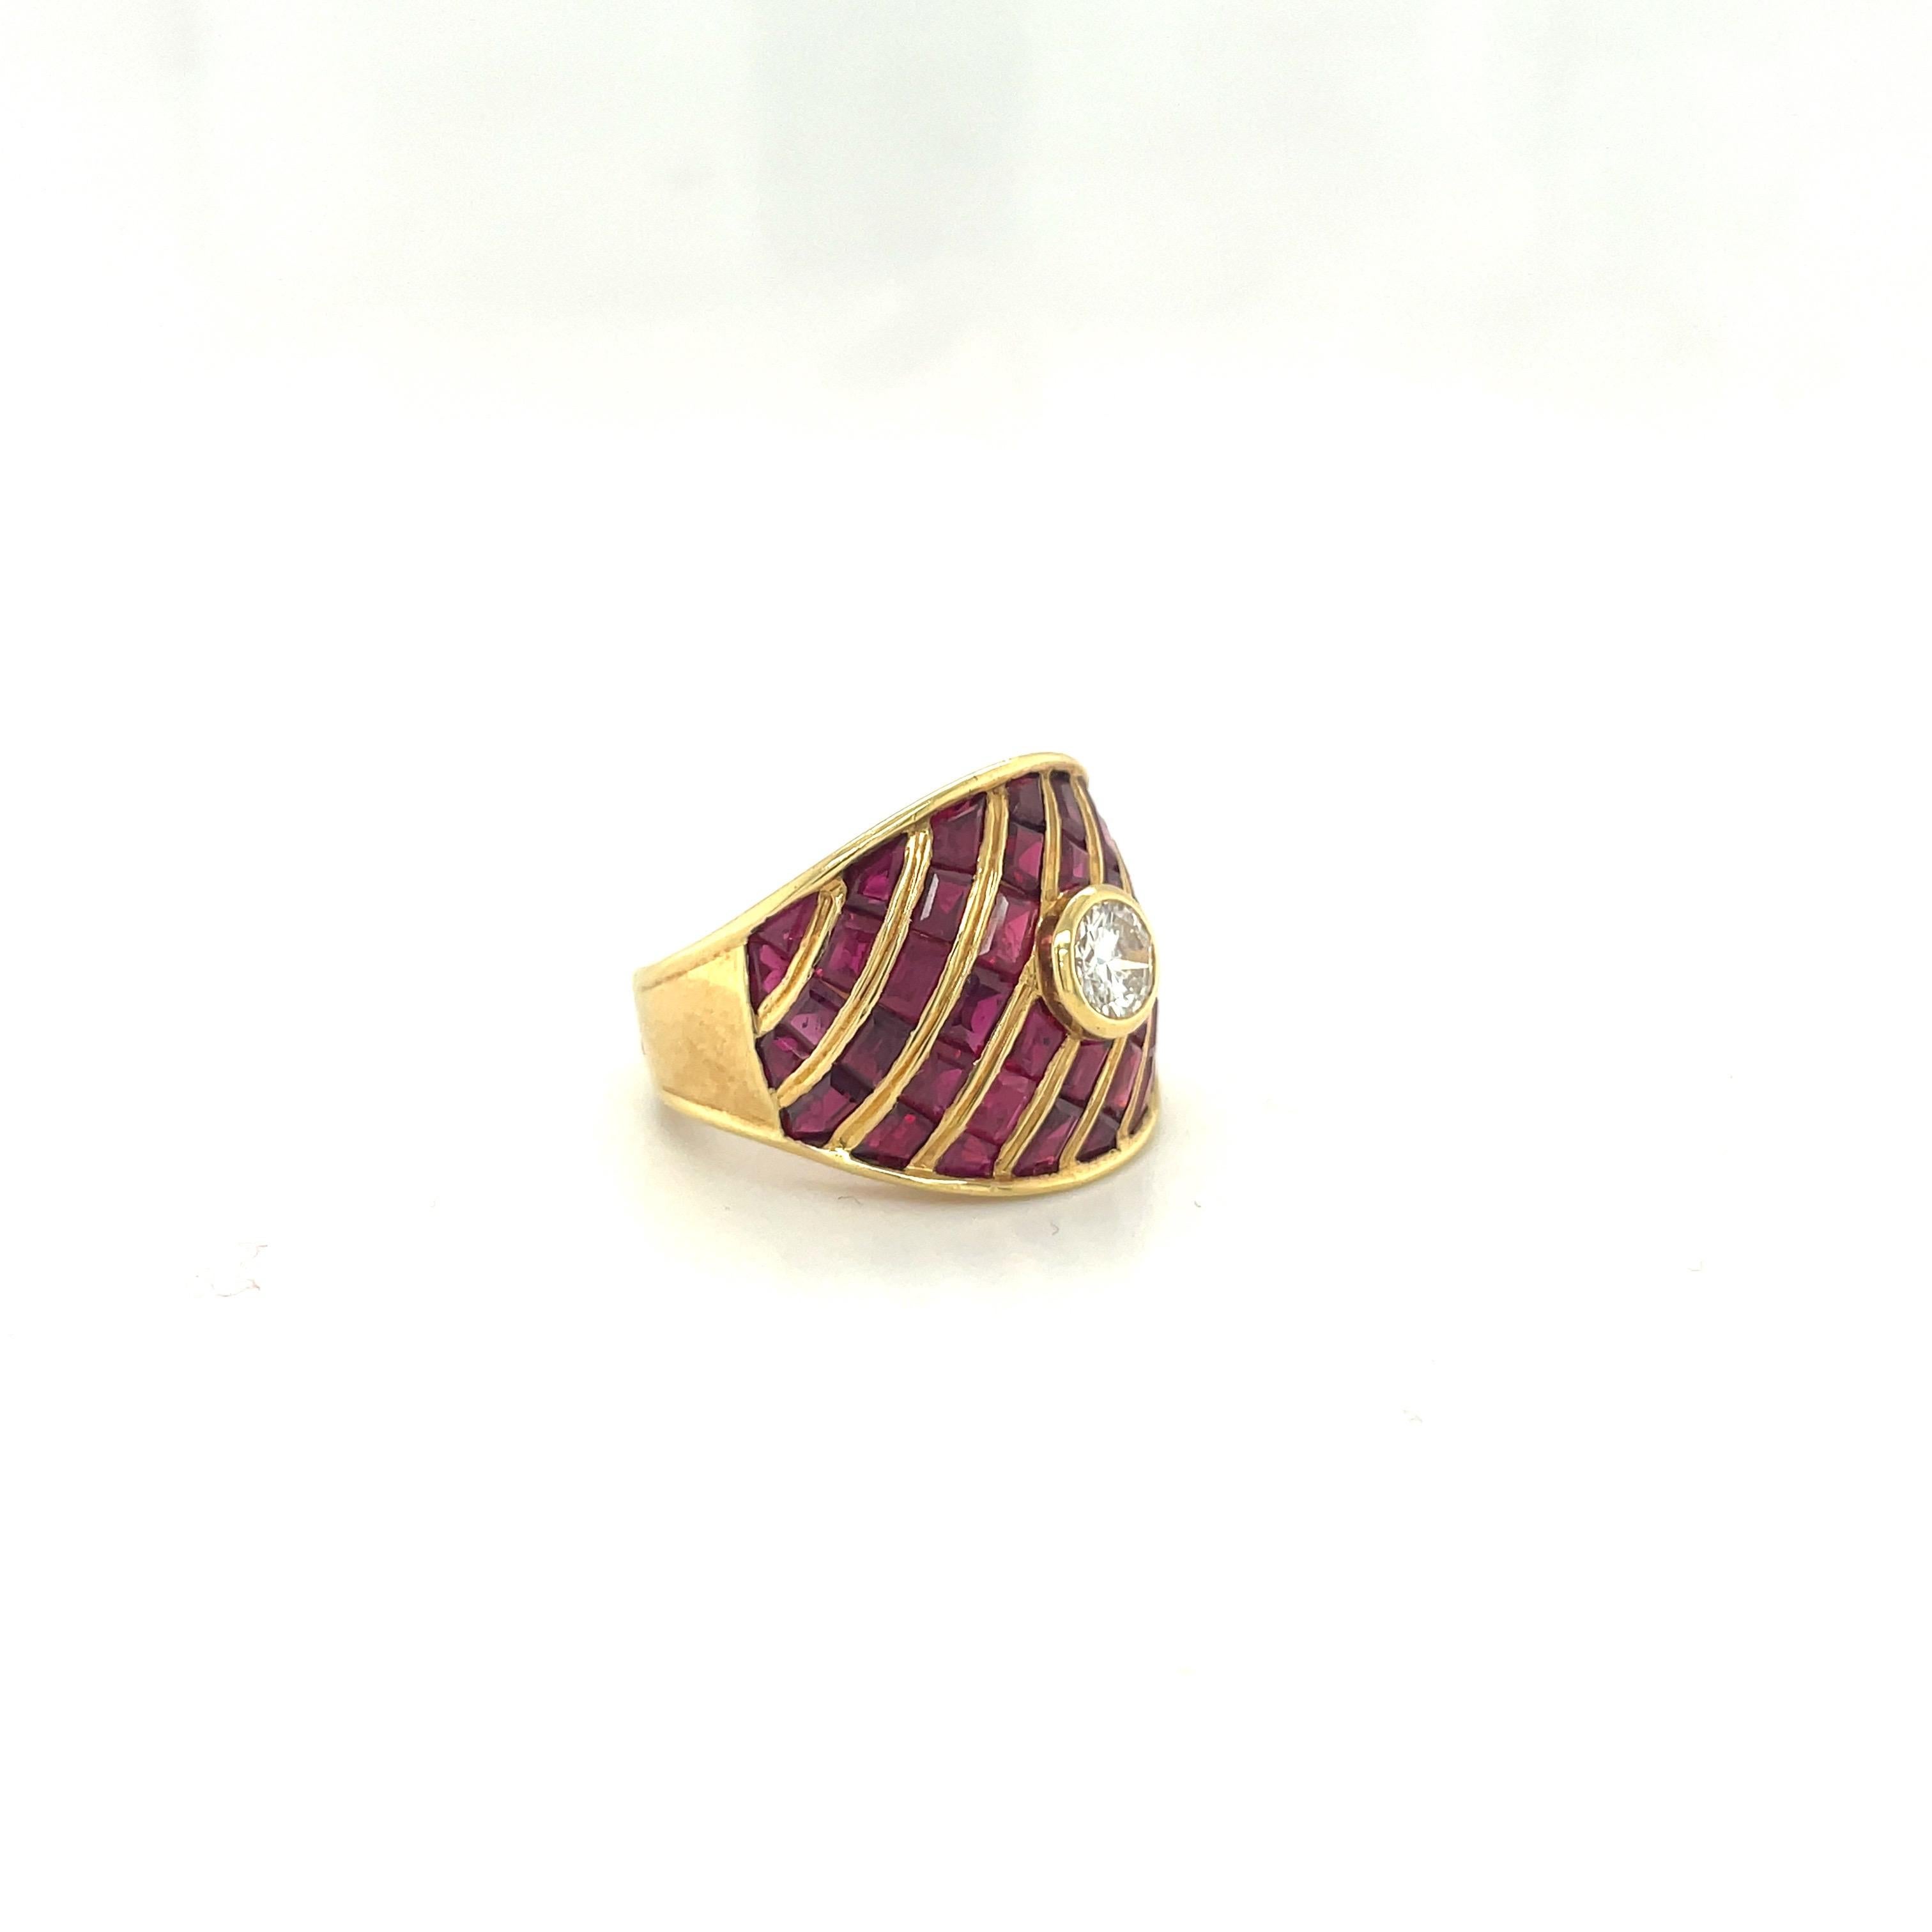 This stunning tapered statement ring is composed of baguette and calibre cut rubies surrounding a single G color round brilliant bezel set diamond, expertly set in 18 karat yellow gold. 
Ruby total carat weight - 6.27cts
Diamond 0.25 carat round